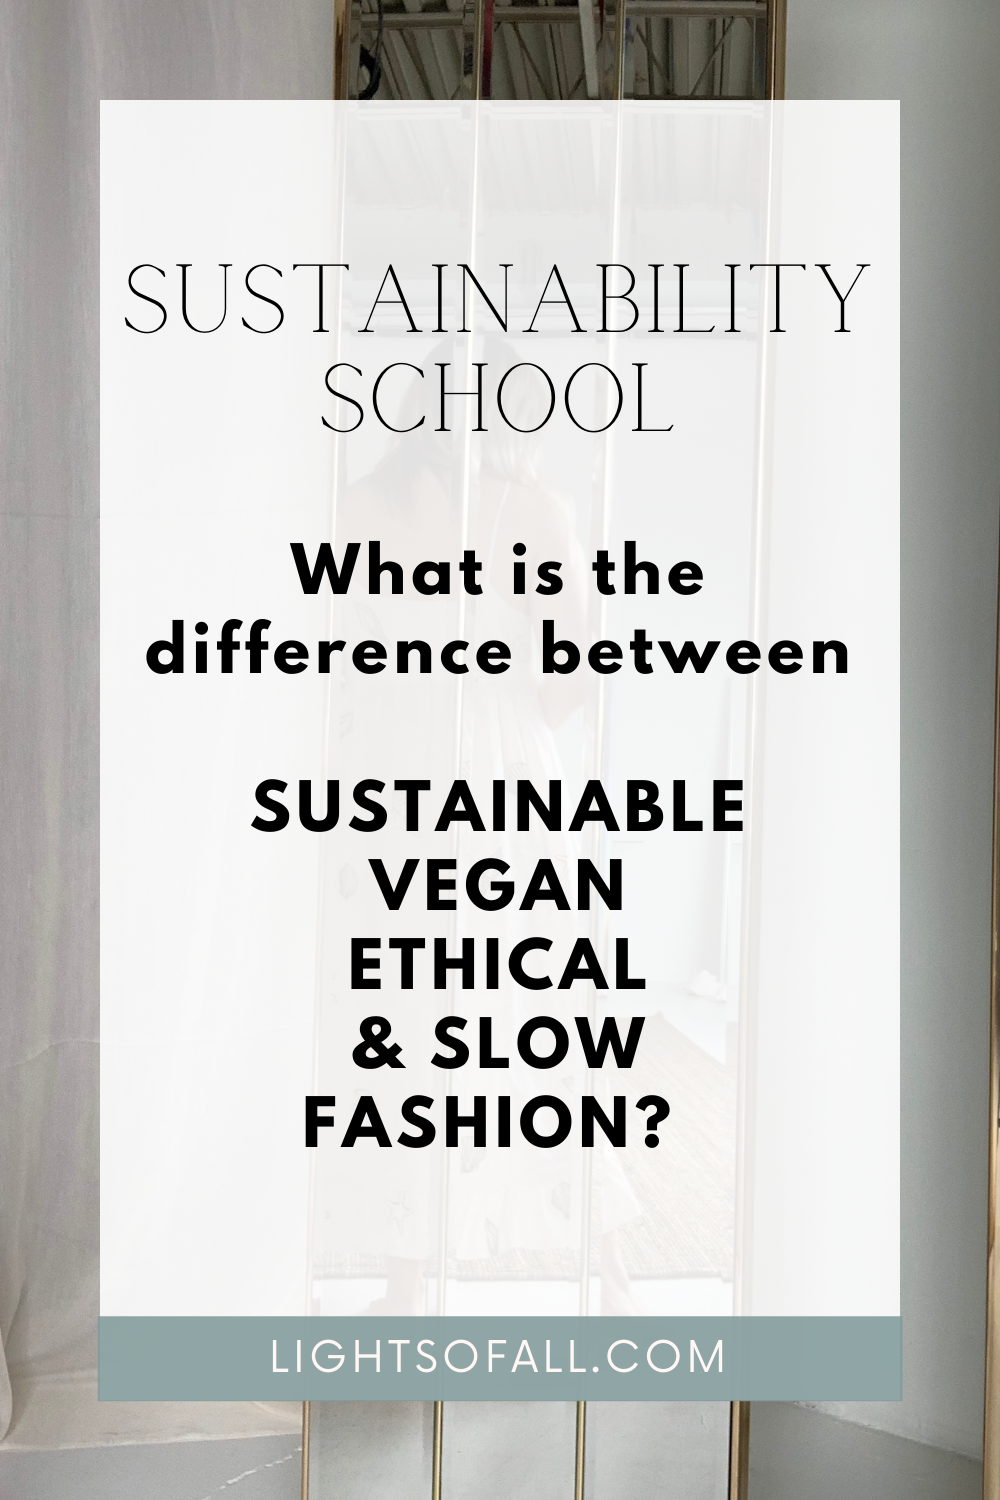 The difference between Ethical, Slow, Sustainable and Vegan Fashion.